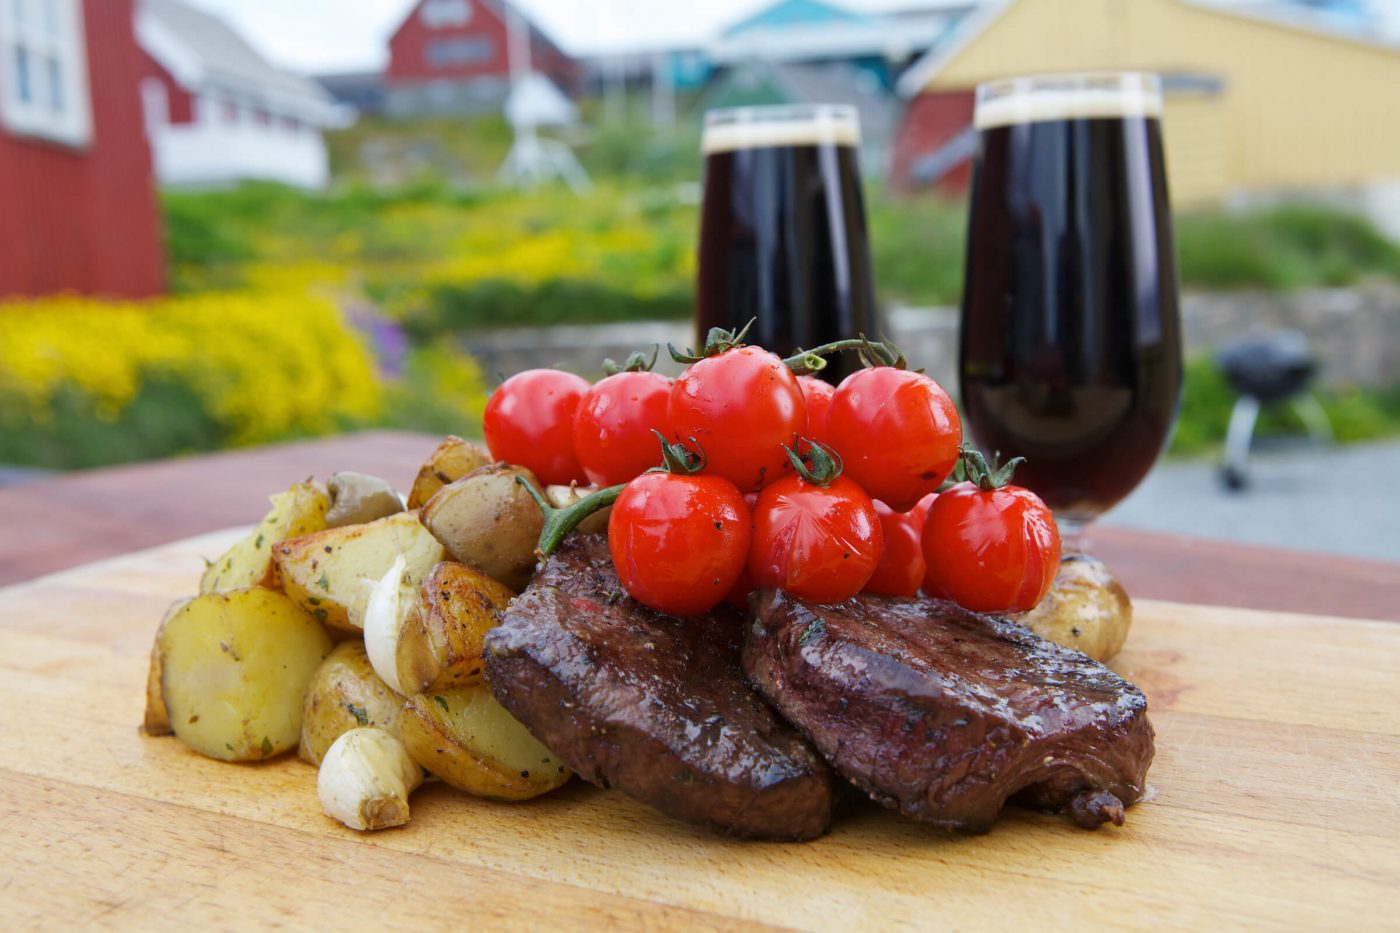 Grilled reindeer meat with greenlandic beer, by ace and ace